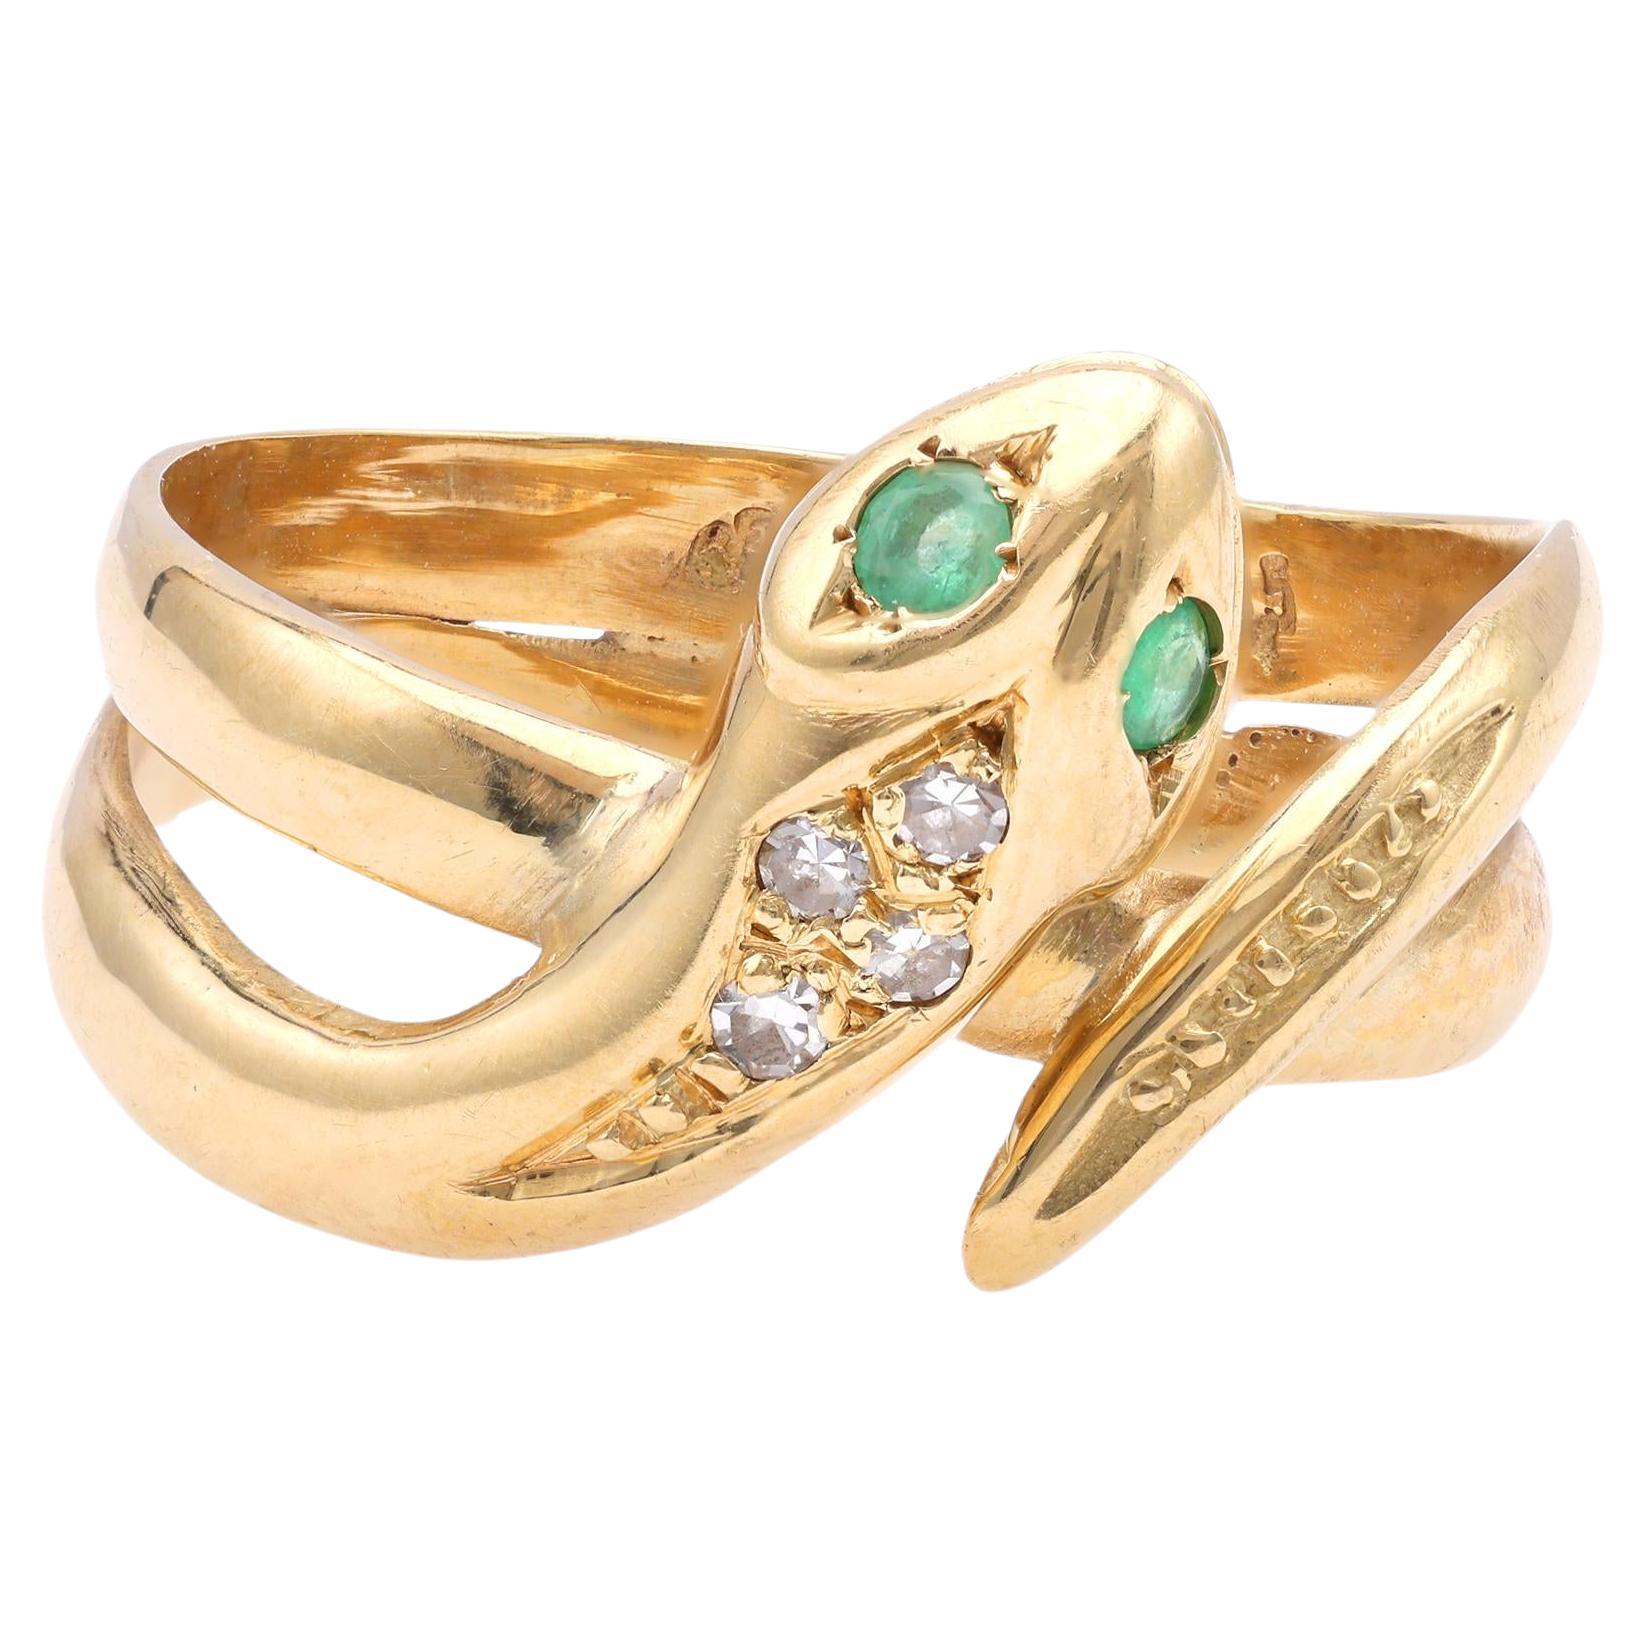 One Vintage Austrian Emerald Diamond 14k Yellow Gold Snake Ring. For Sale